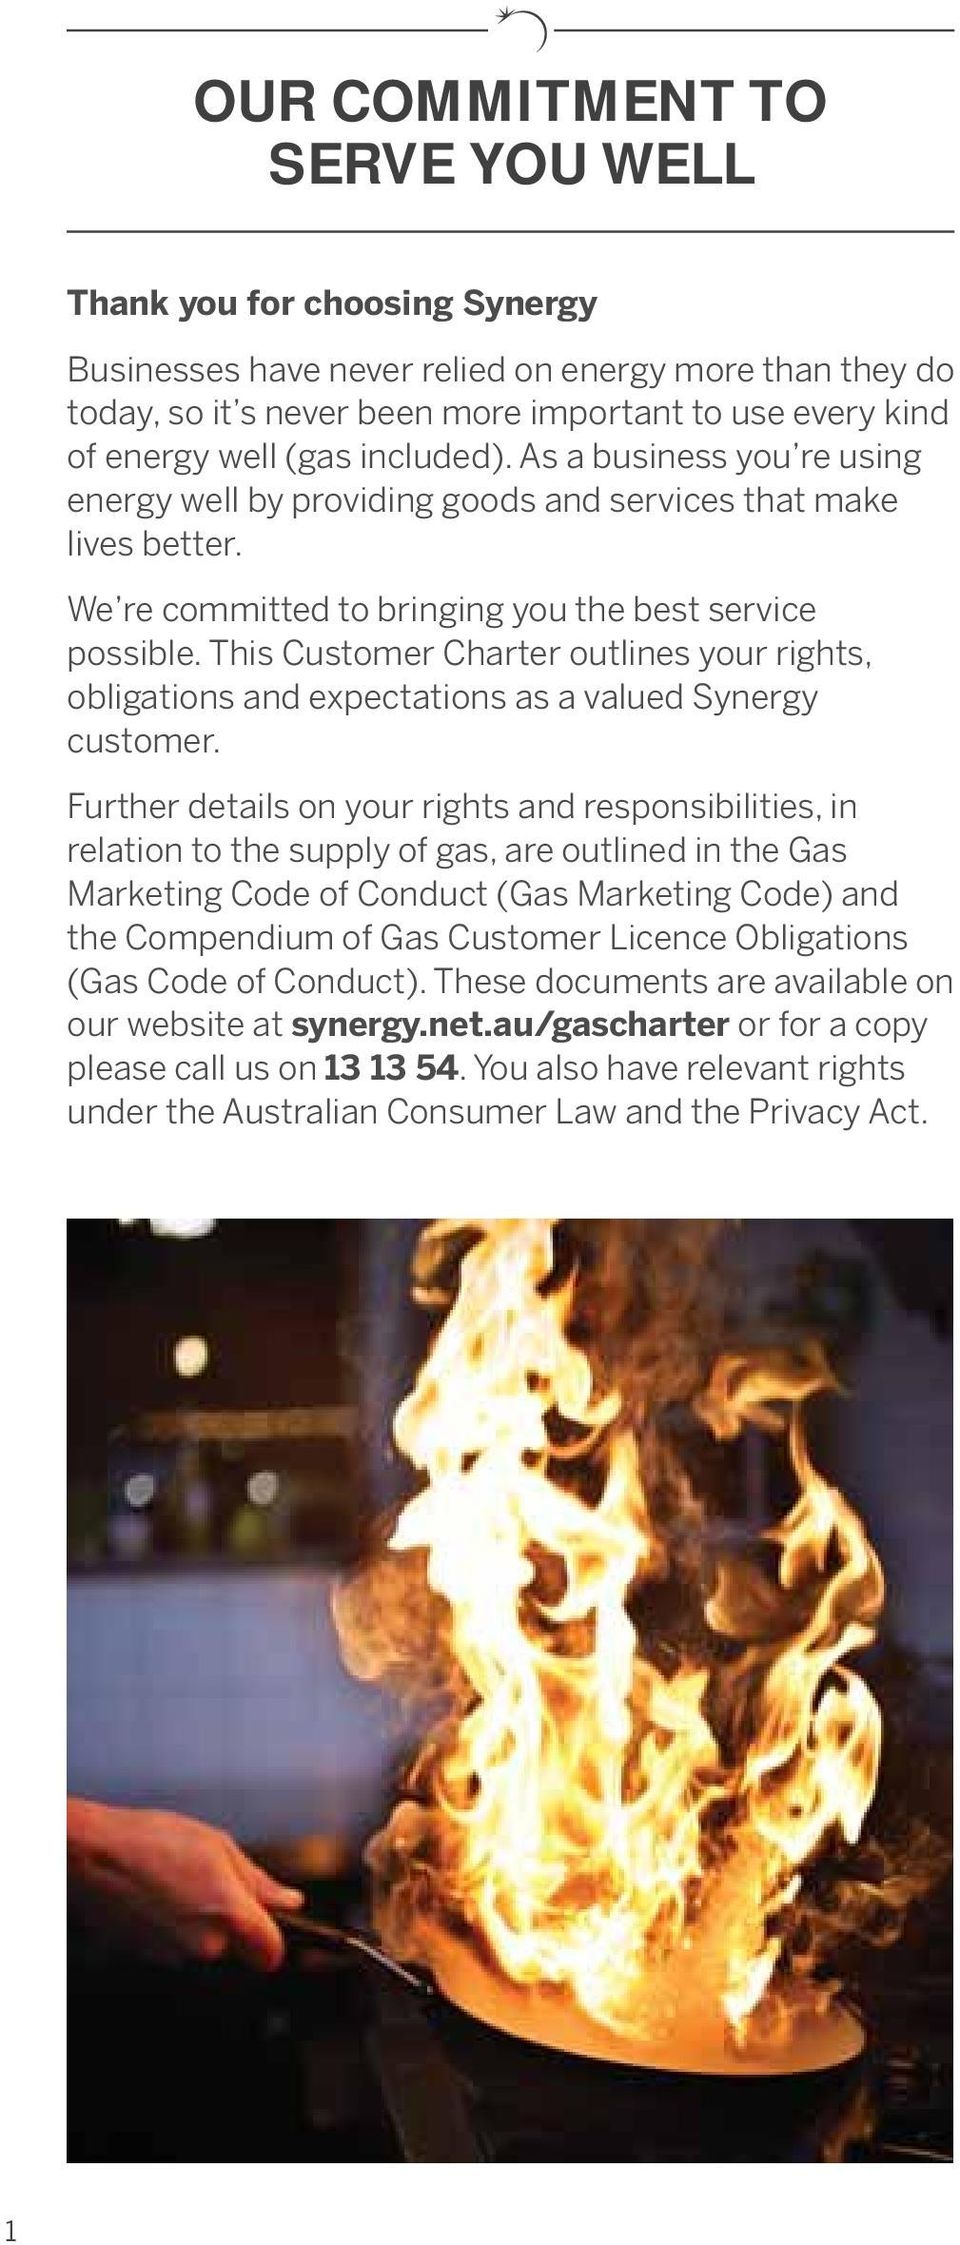 This Customer Charter outlines your rights, obligations and expectations as a valued Synergy customer.